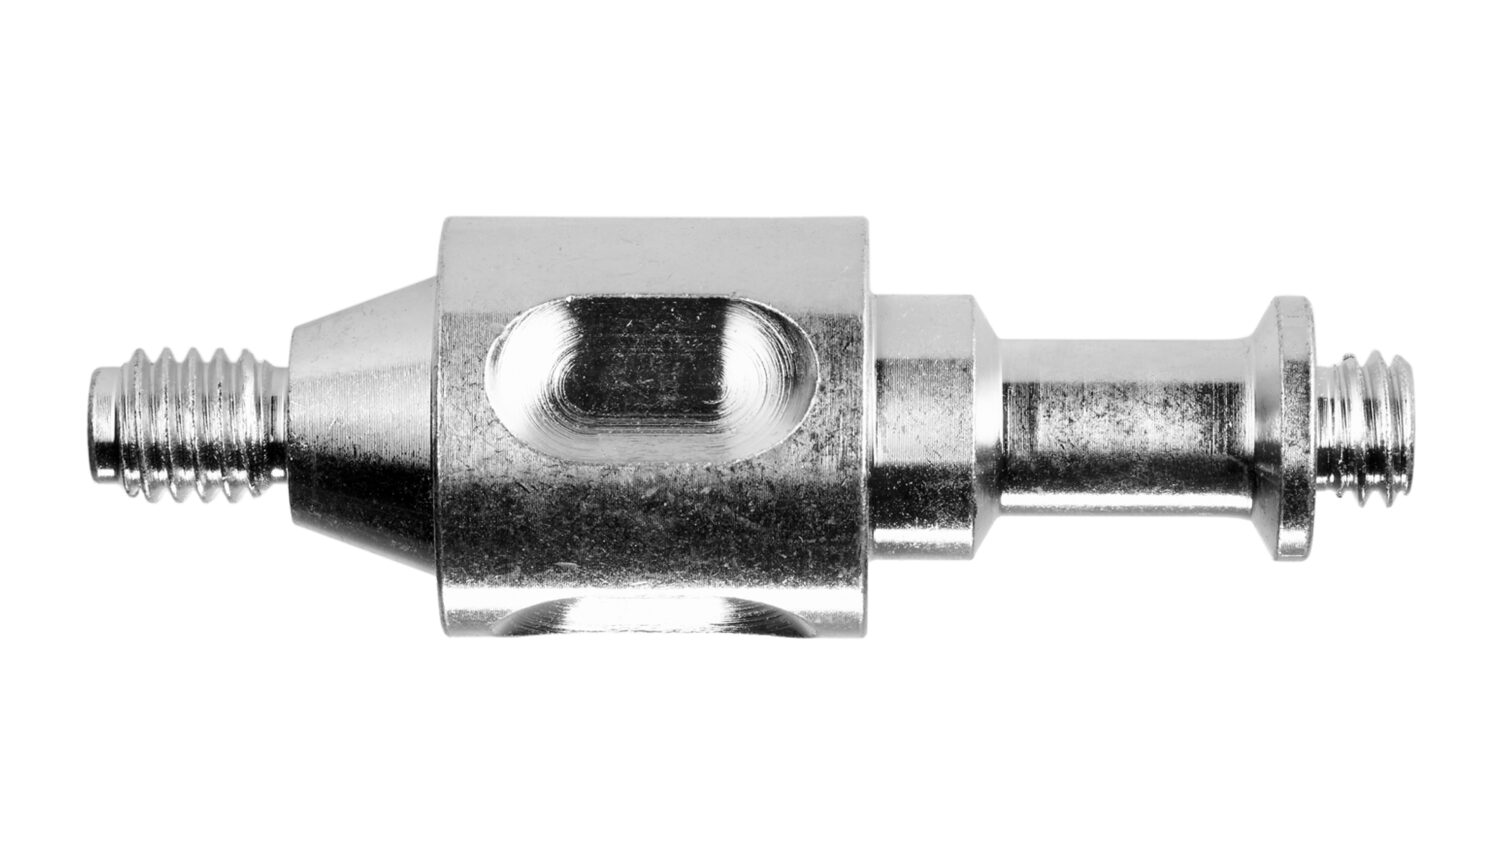 FOBA ceiling rail system combitube connector